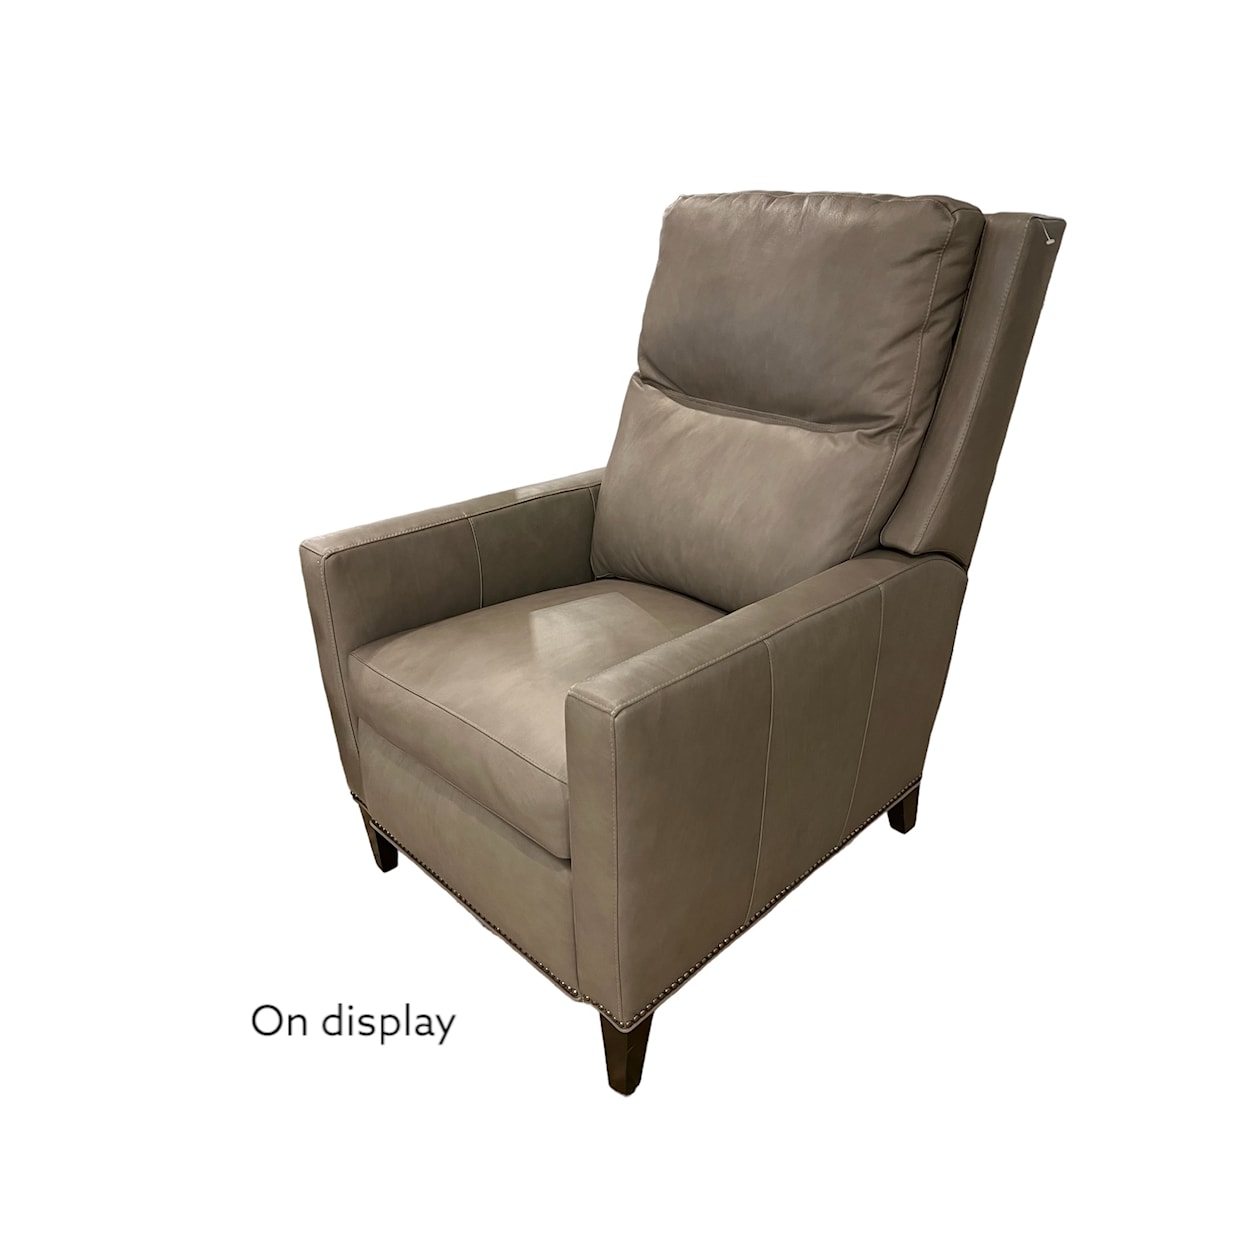 MotionCraft by Sherrill Motioncraft Collection Manual Recliner